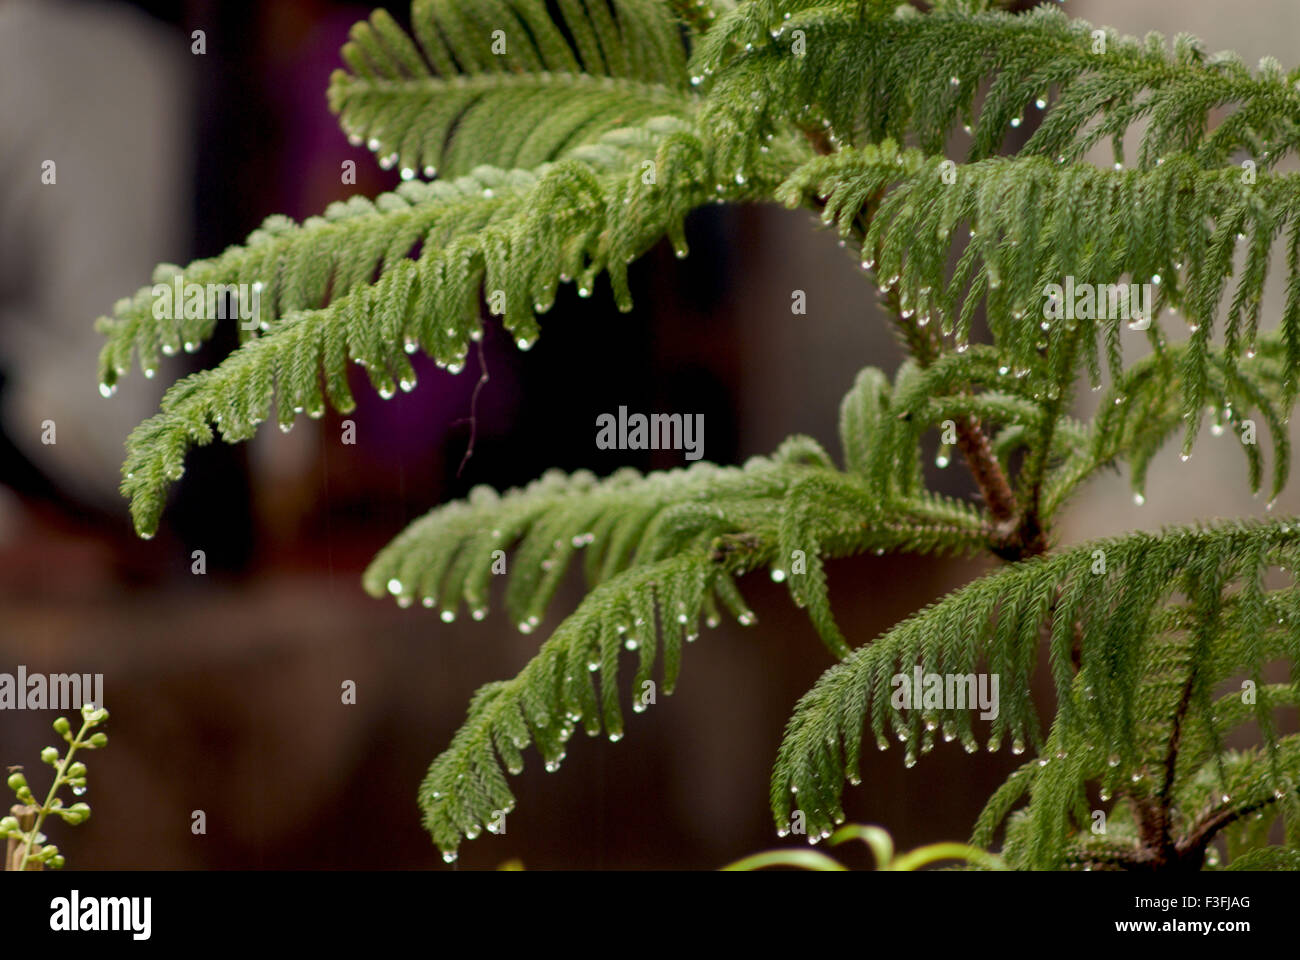 Sudden cloud burst on pine leaves forming water droplets like diamonds Stock Photo